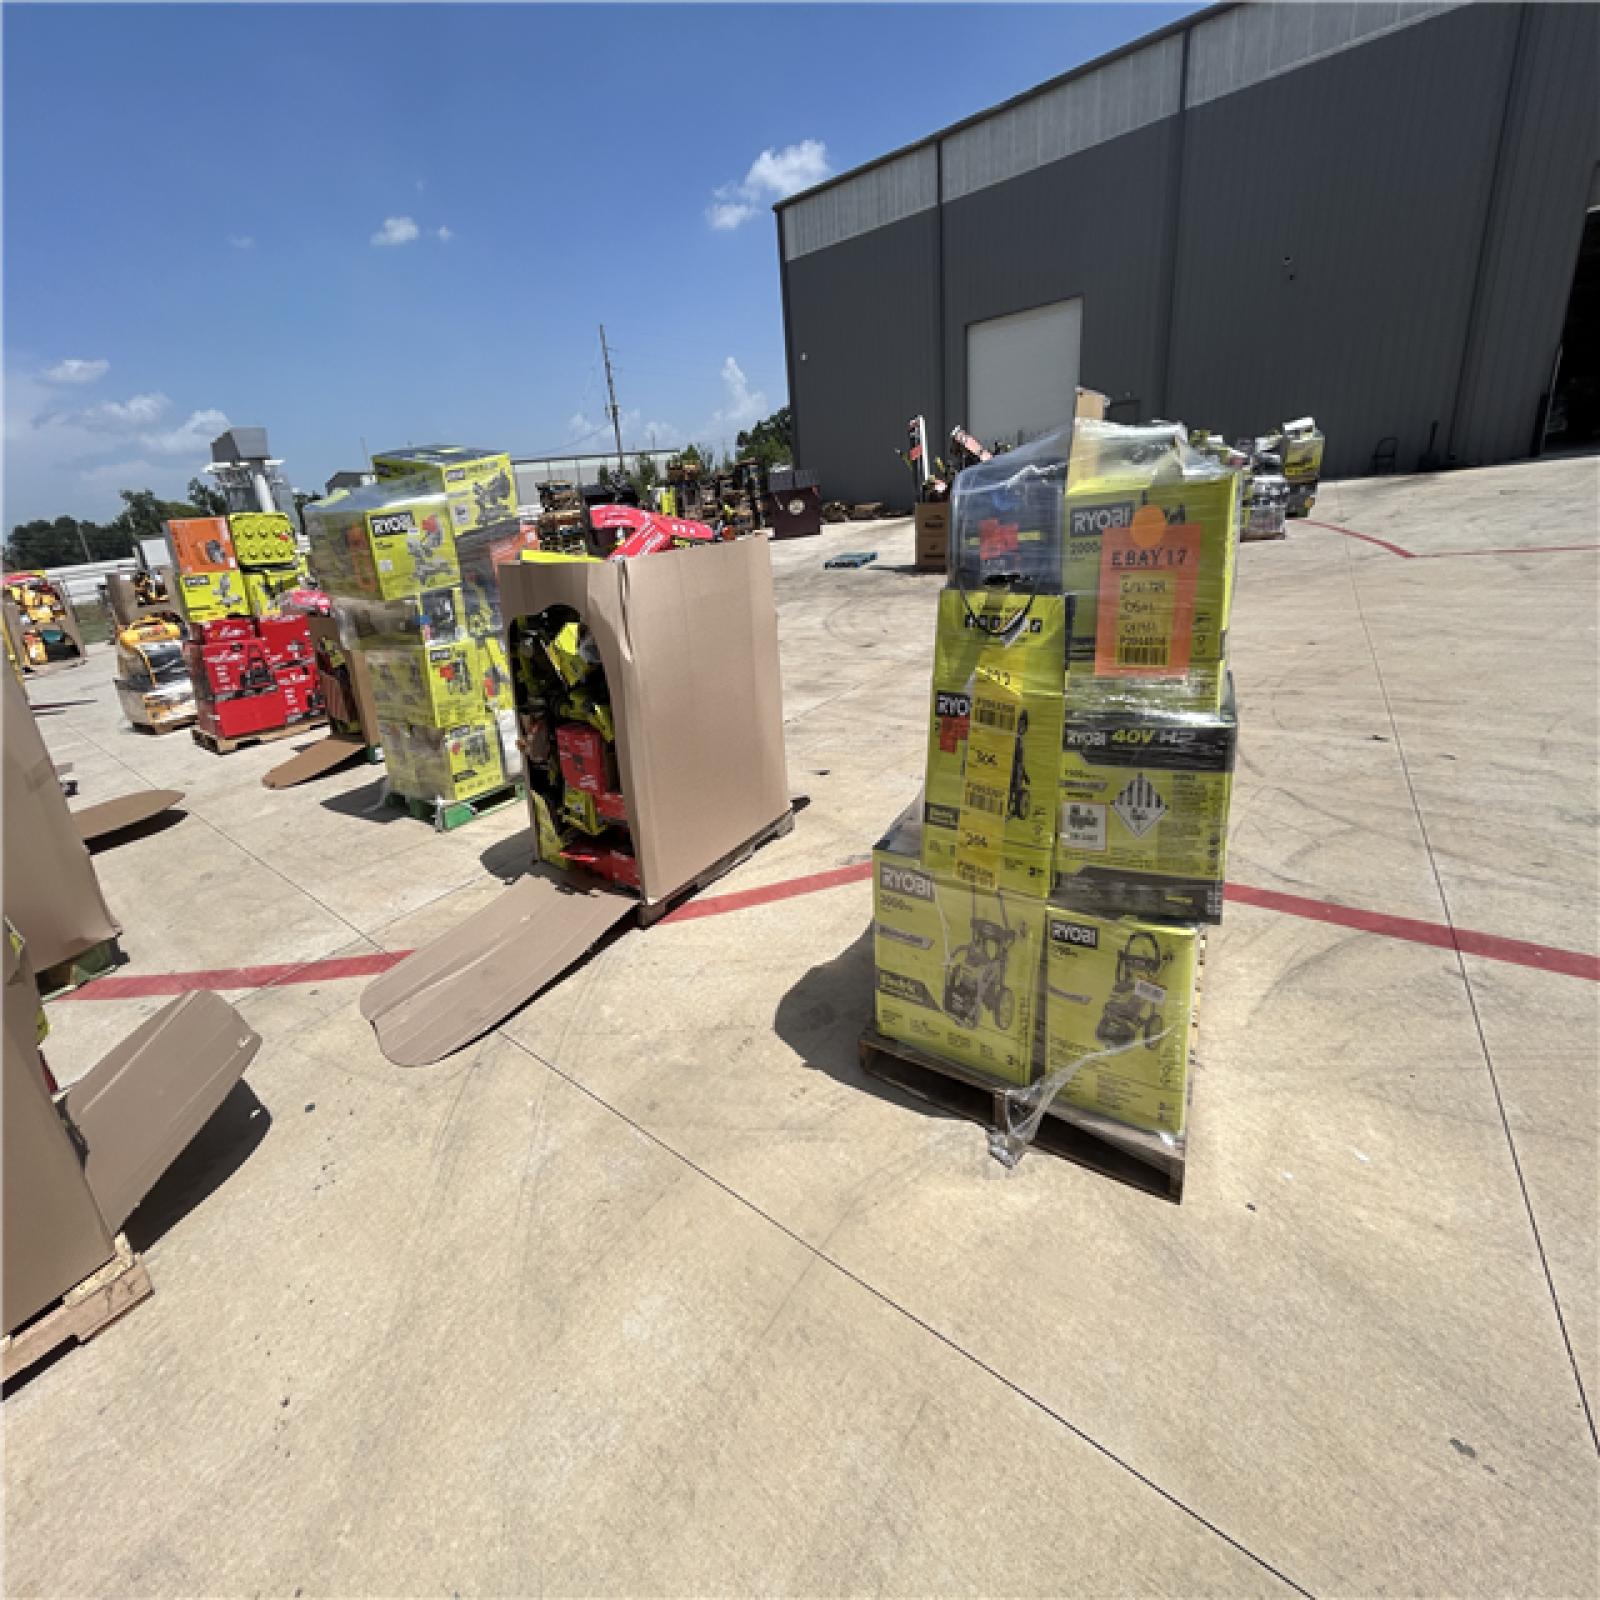 Houston Location- AS IS PARTIAL TOOL TRUCKLOAD (13 PALLETS)